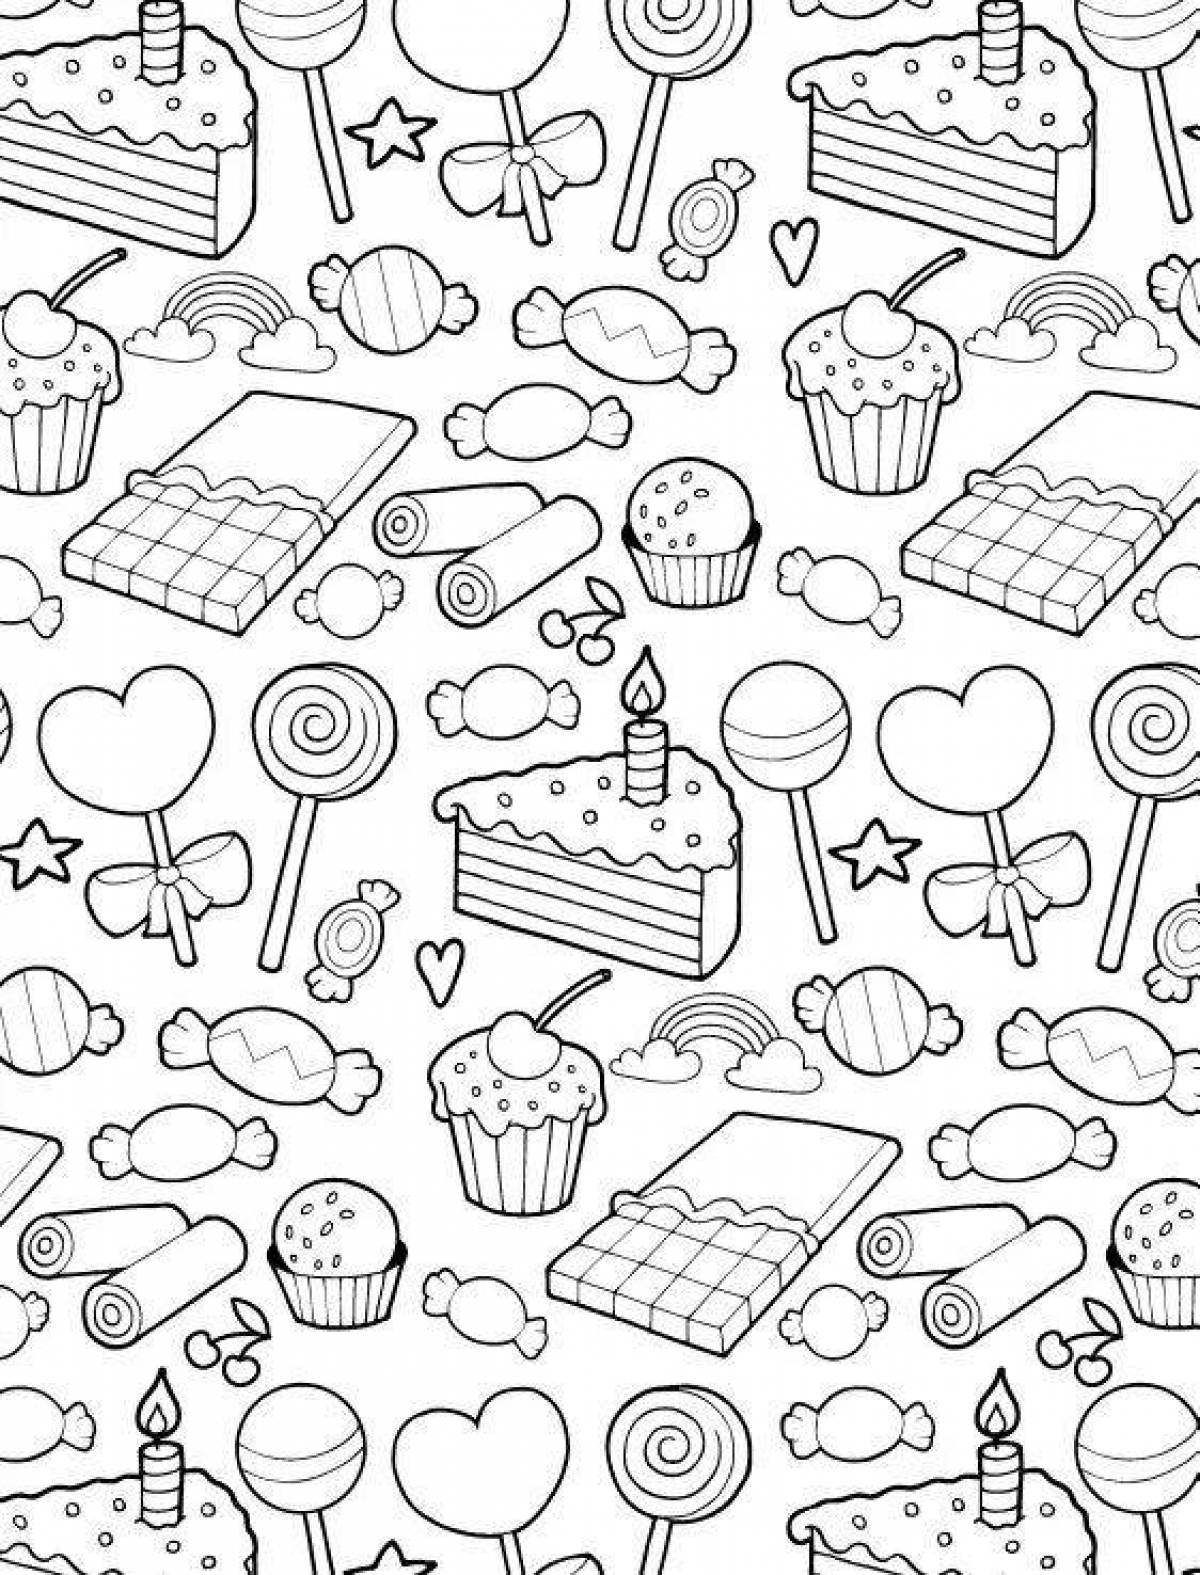 Yummy scented coloring book